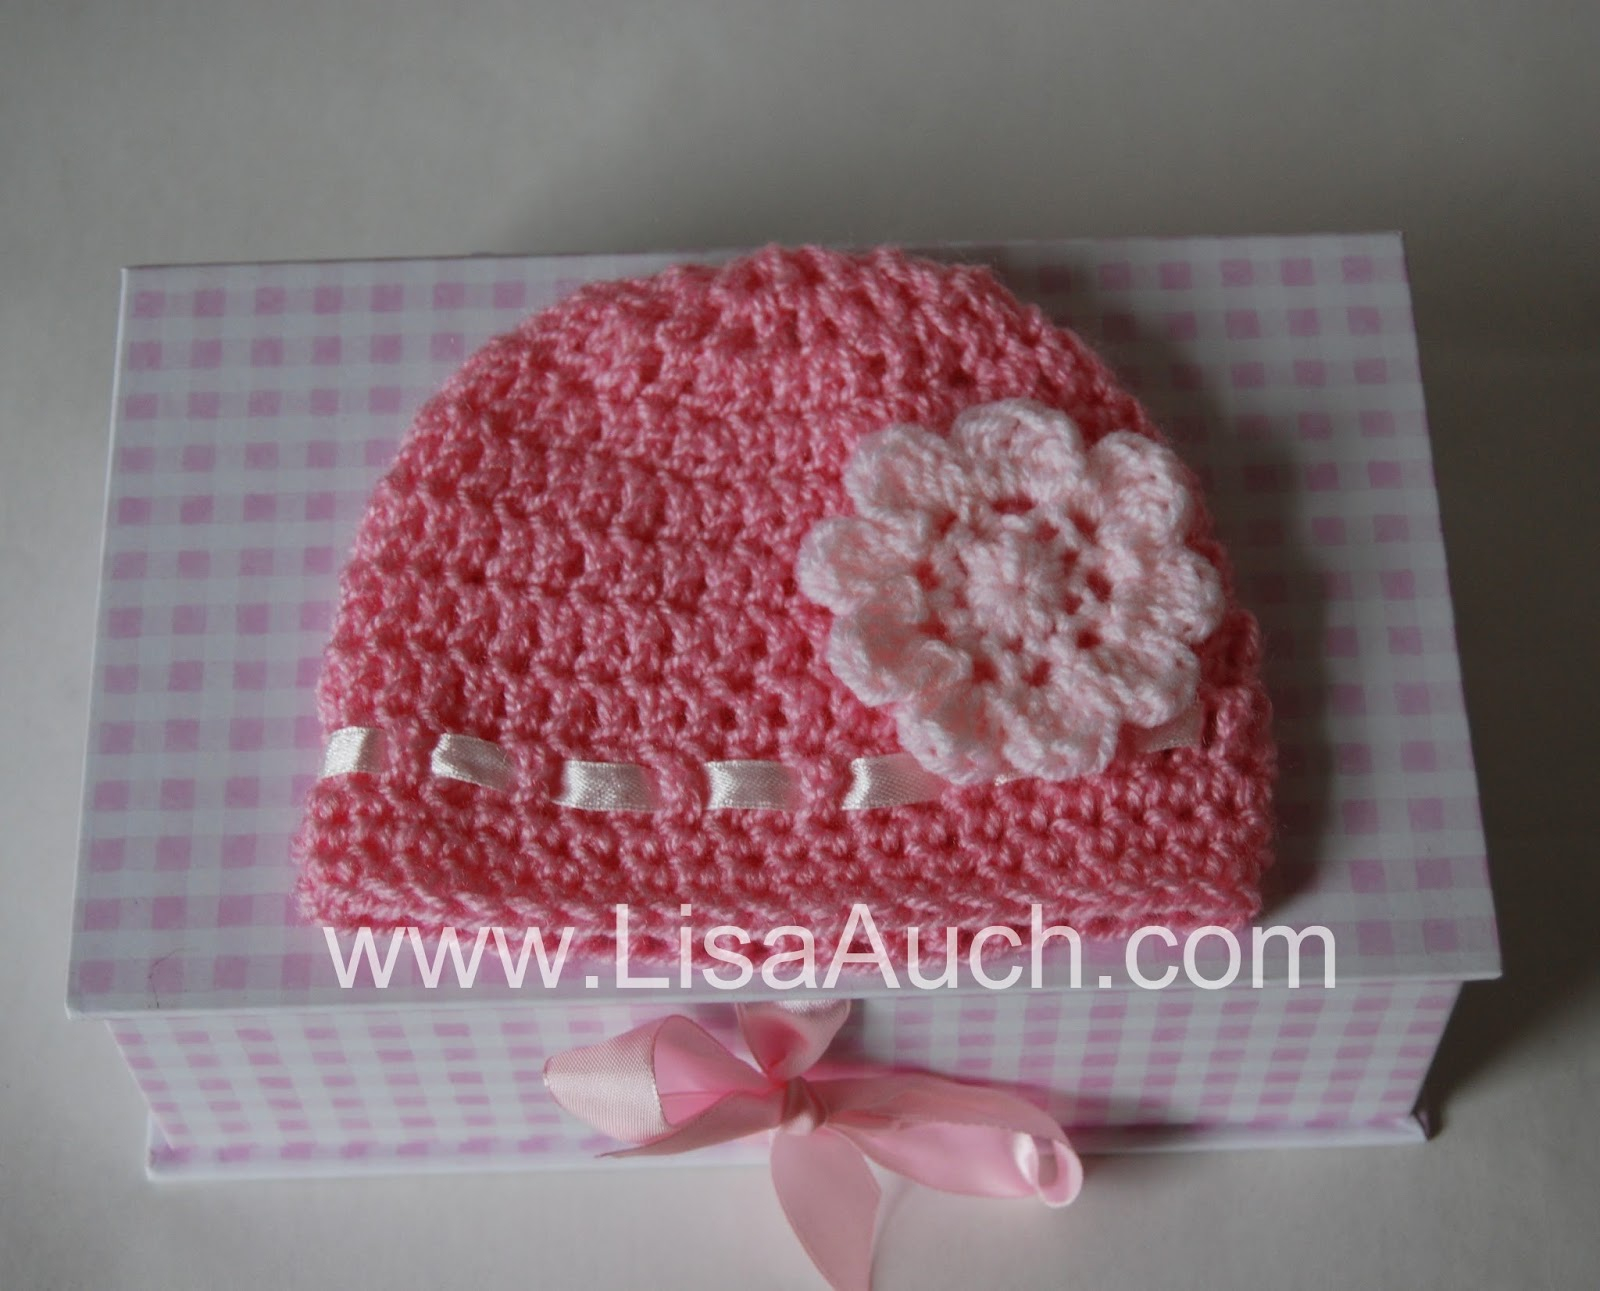 Baby Girl Crochet Patterns Free Crochet Patterns And Designs Lisaauch Free Easy Crochet